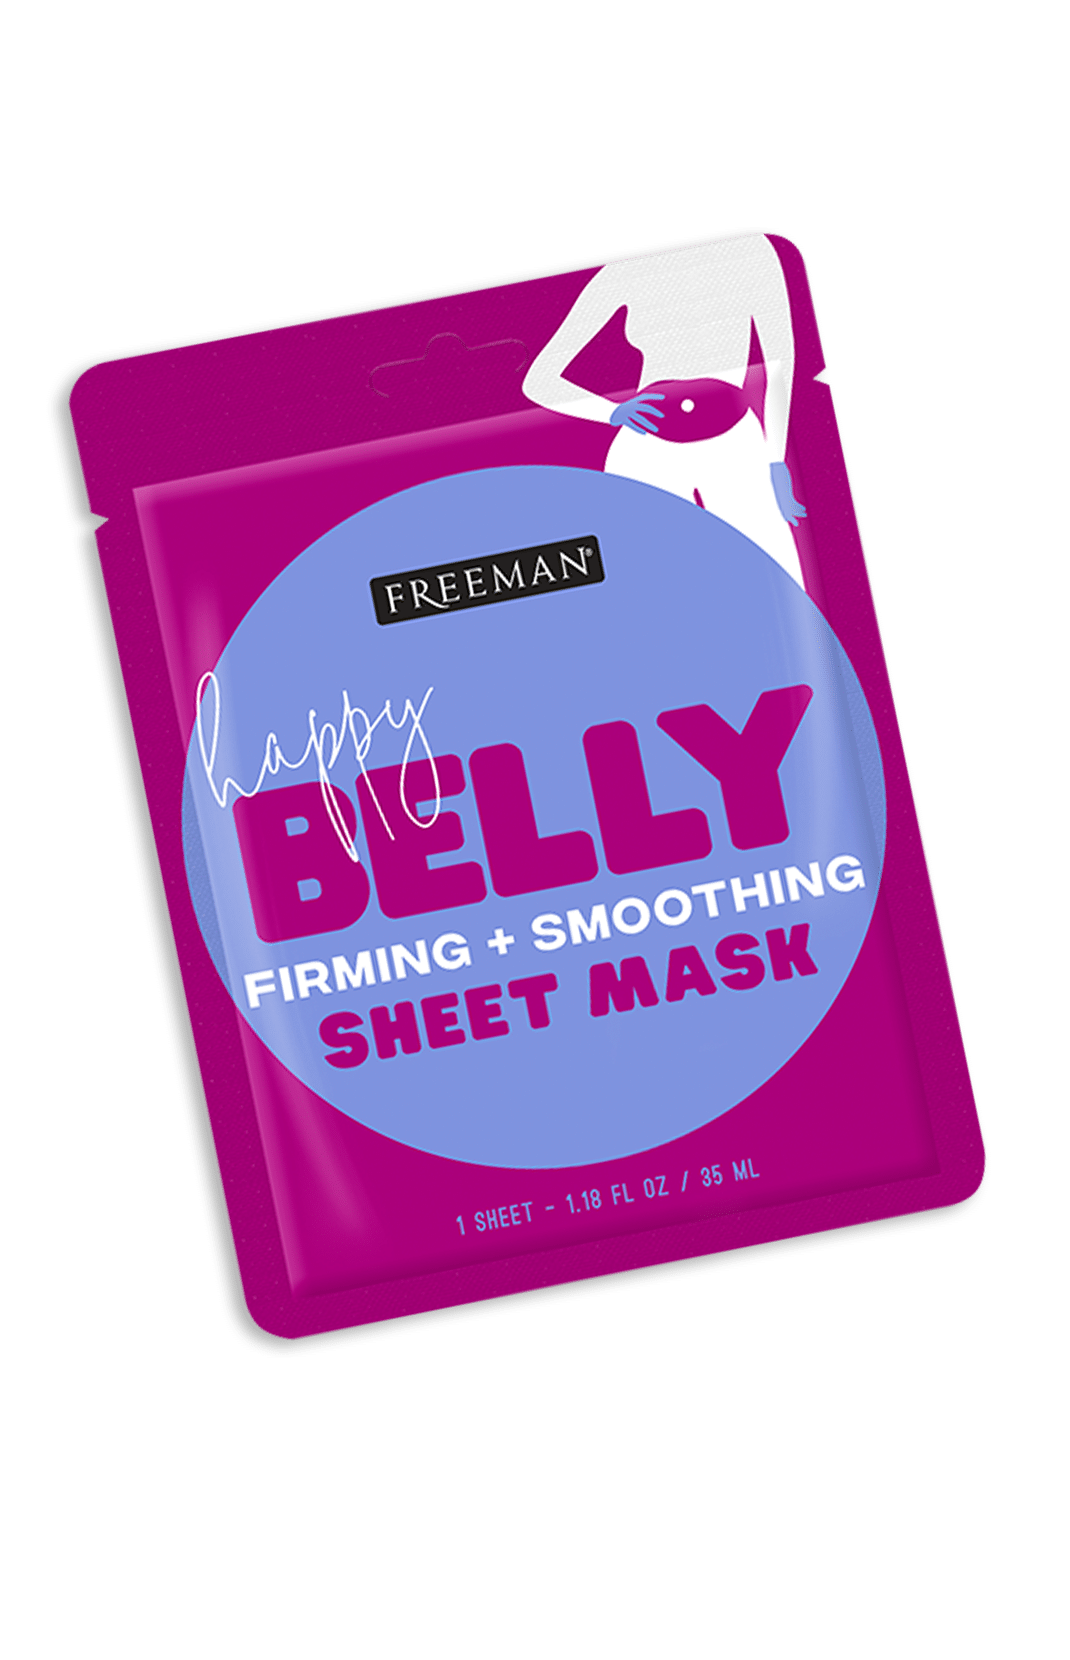 HAPPY BELLY FIRMING + SMOOTHING